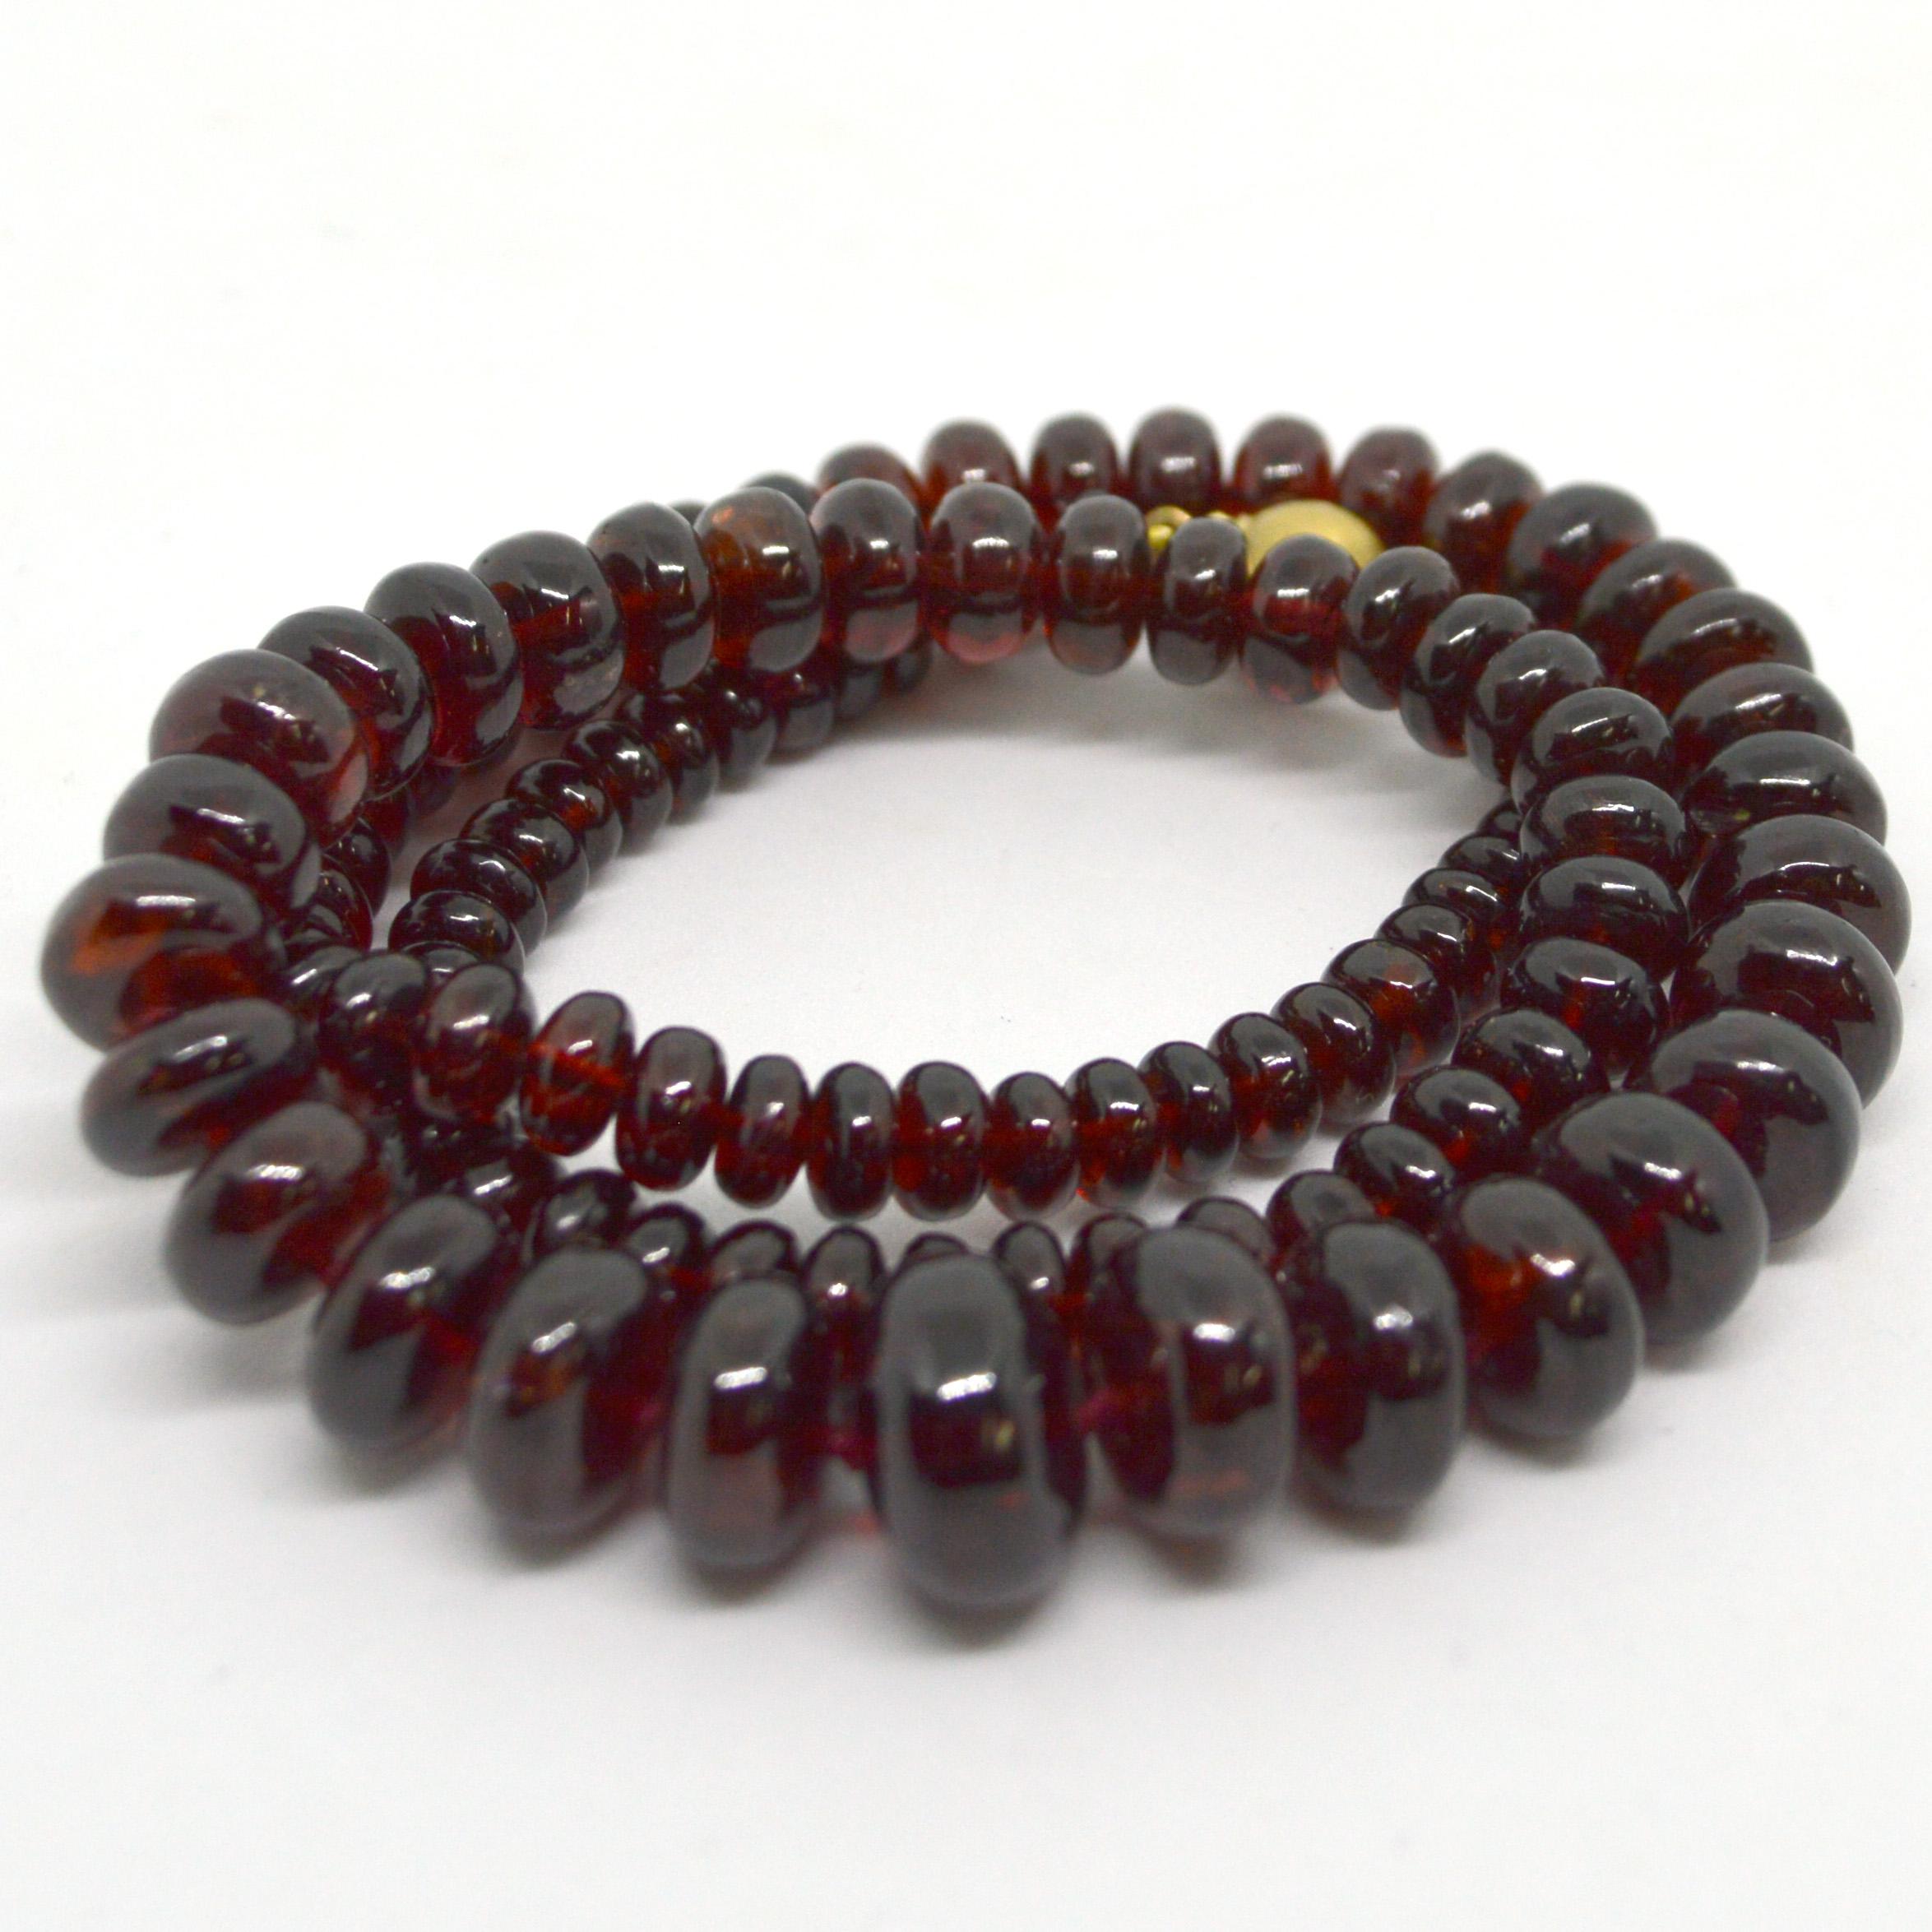 Delicate graduating Garnet roundels 5-12.5mm hand knotted with as 8mm 14 karet gold clasp
Finished length is 49cm  19.3 inches